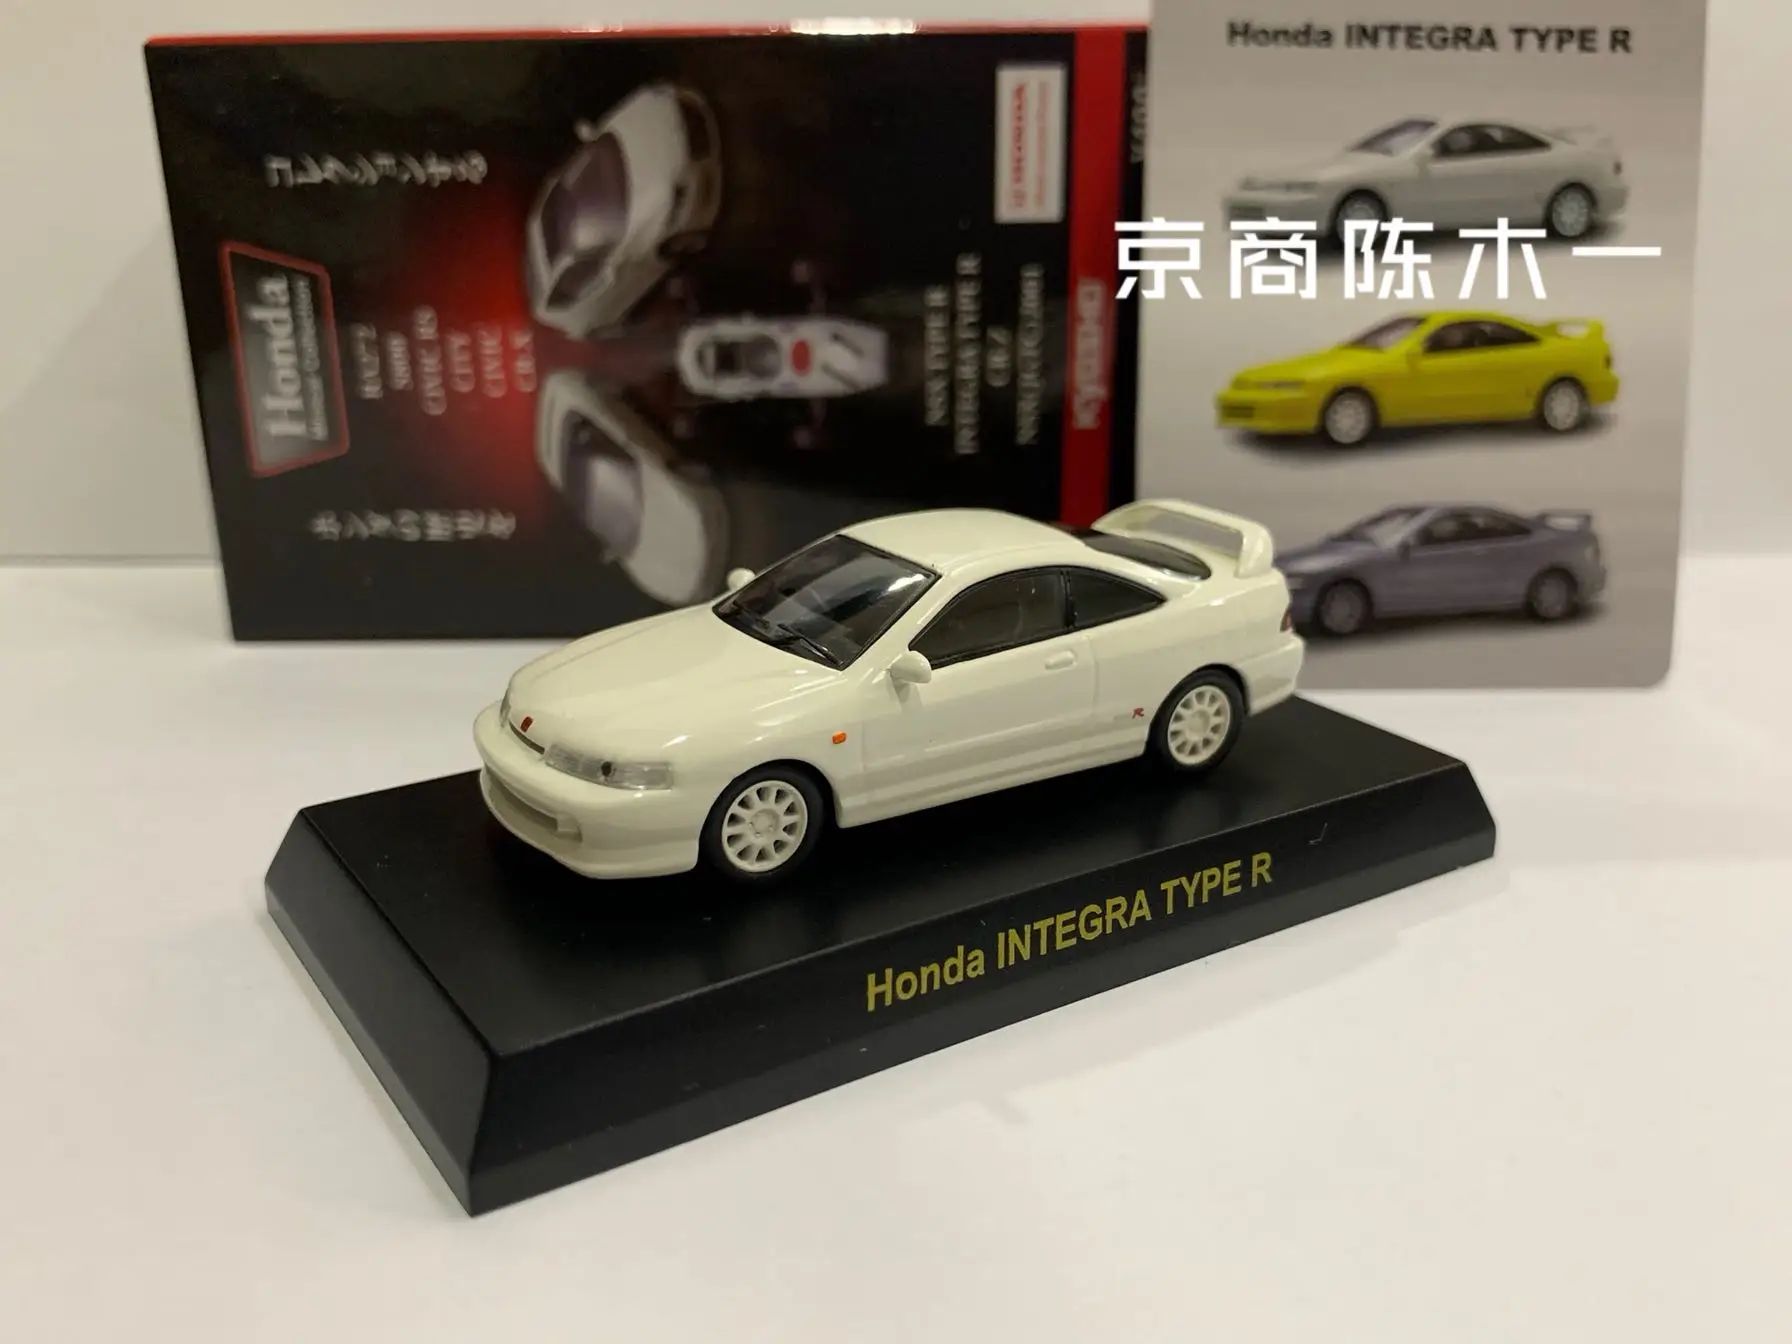 

1/64 KYOSHO Honda Integra Type R DC2 Collection of die-cast alloy car decoration model toys